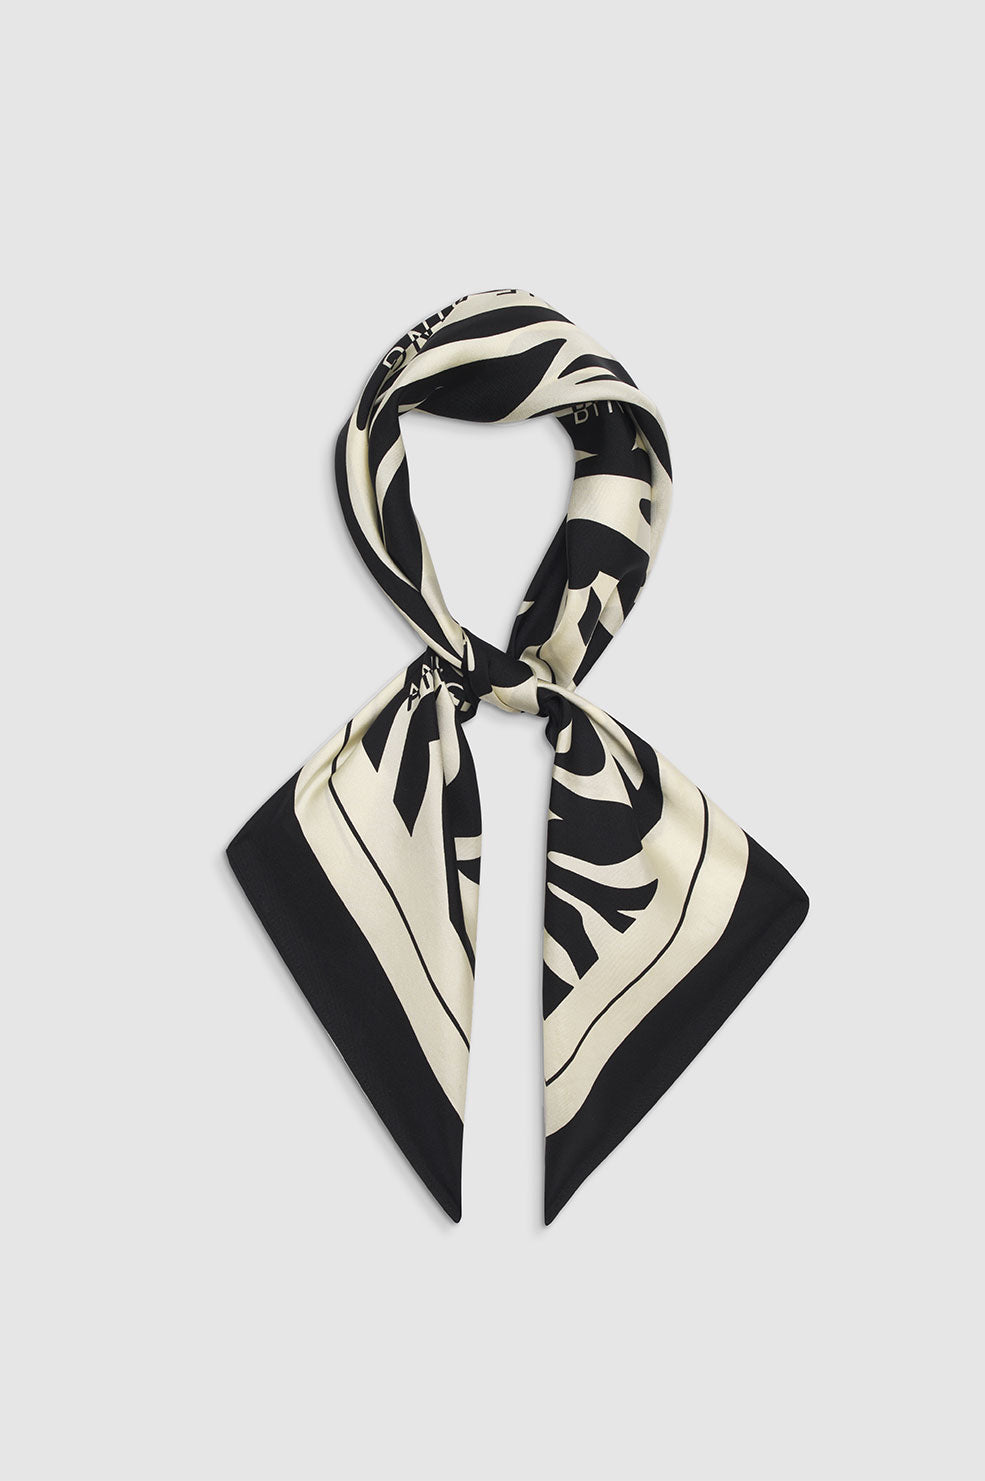 ANINE BING Evelyn Scarf - Black And Cream Zebra - Tied View